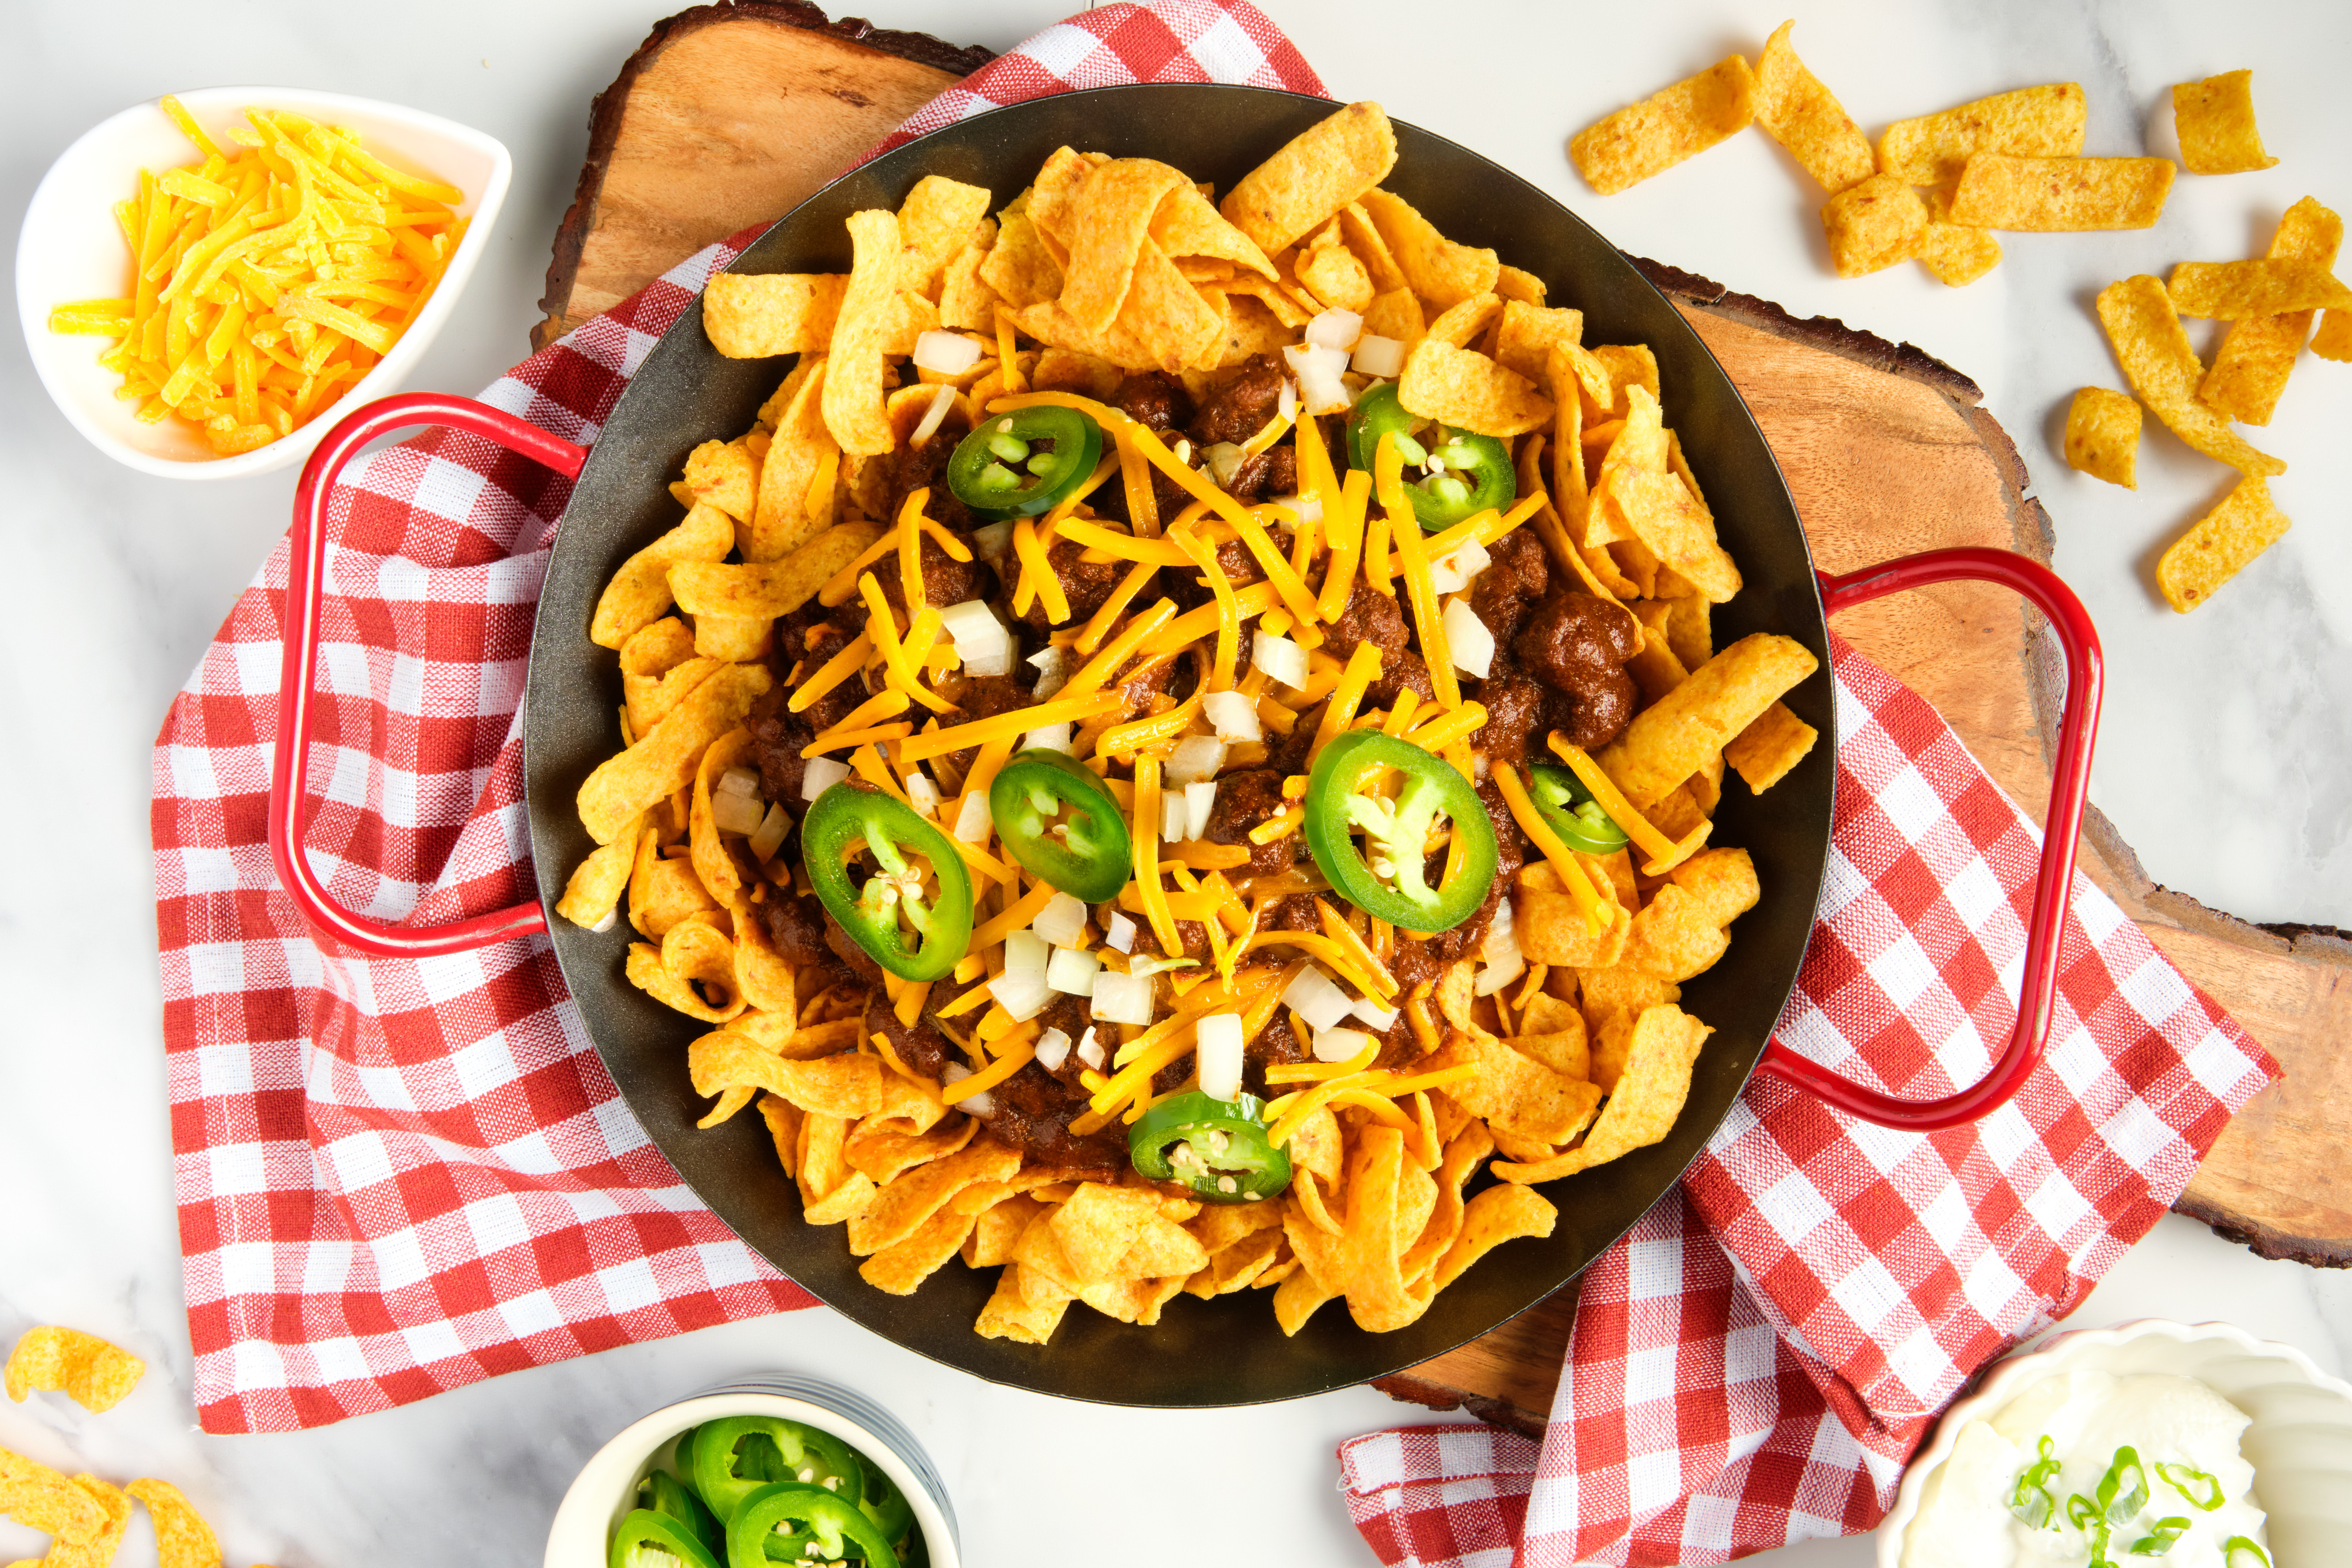 A Frito pie, topped with sliced jalapenos and shredded cheddar, is served atop a red-and-white checkered napkin and wooden cutting board. Small bowls of shredded cheese and sliced jalapenos sit nearby.